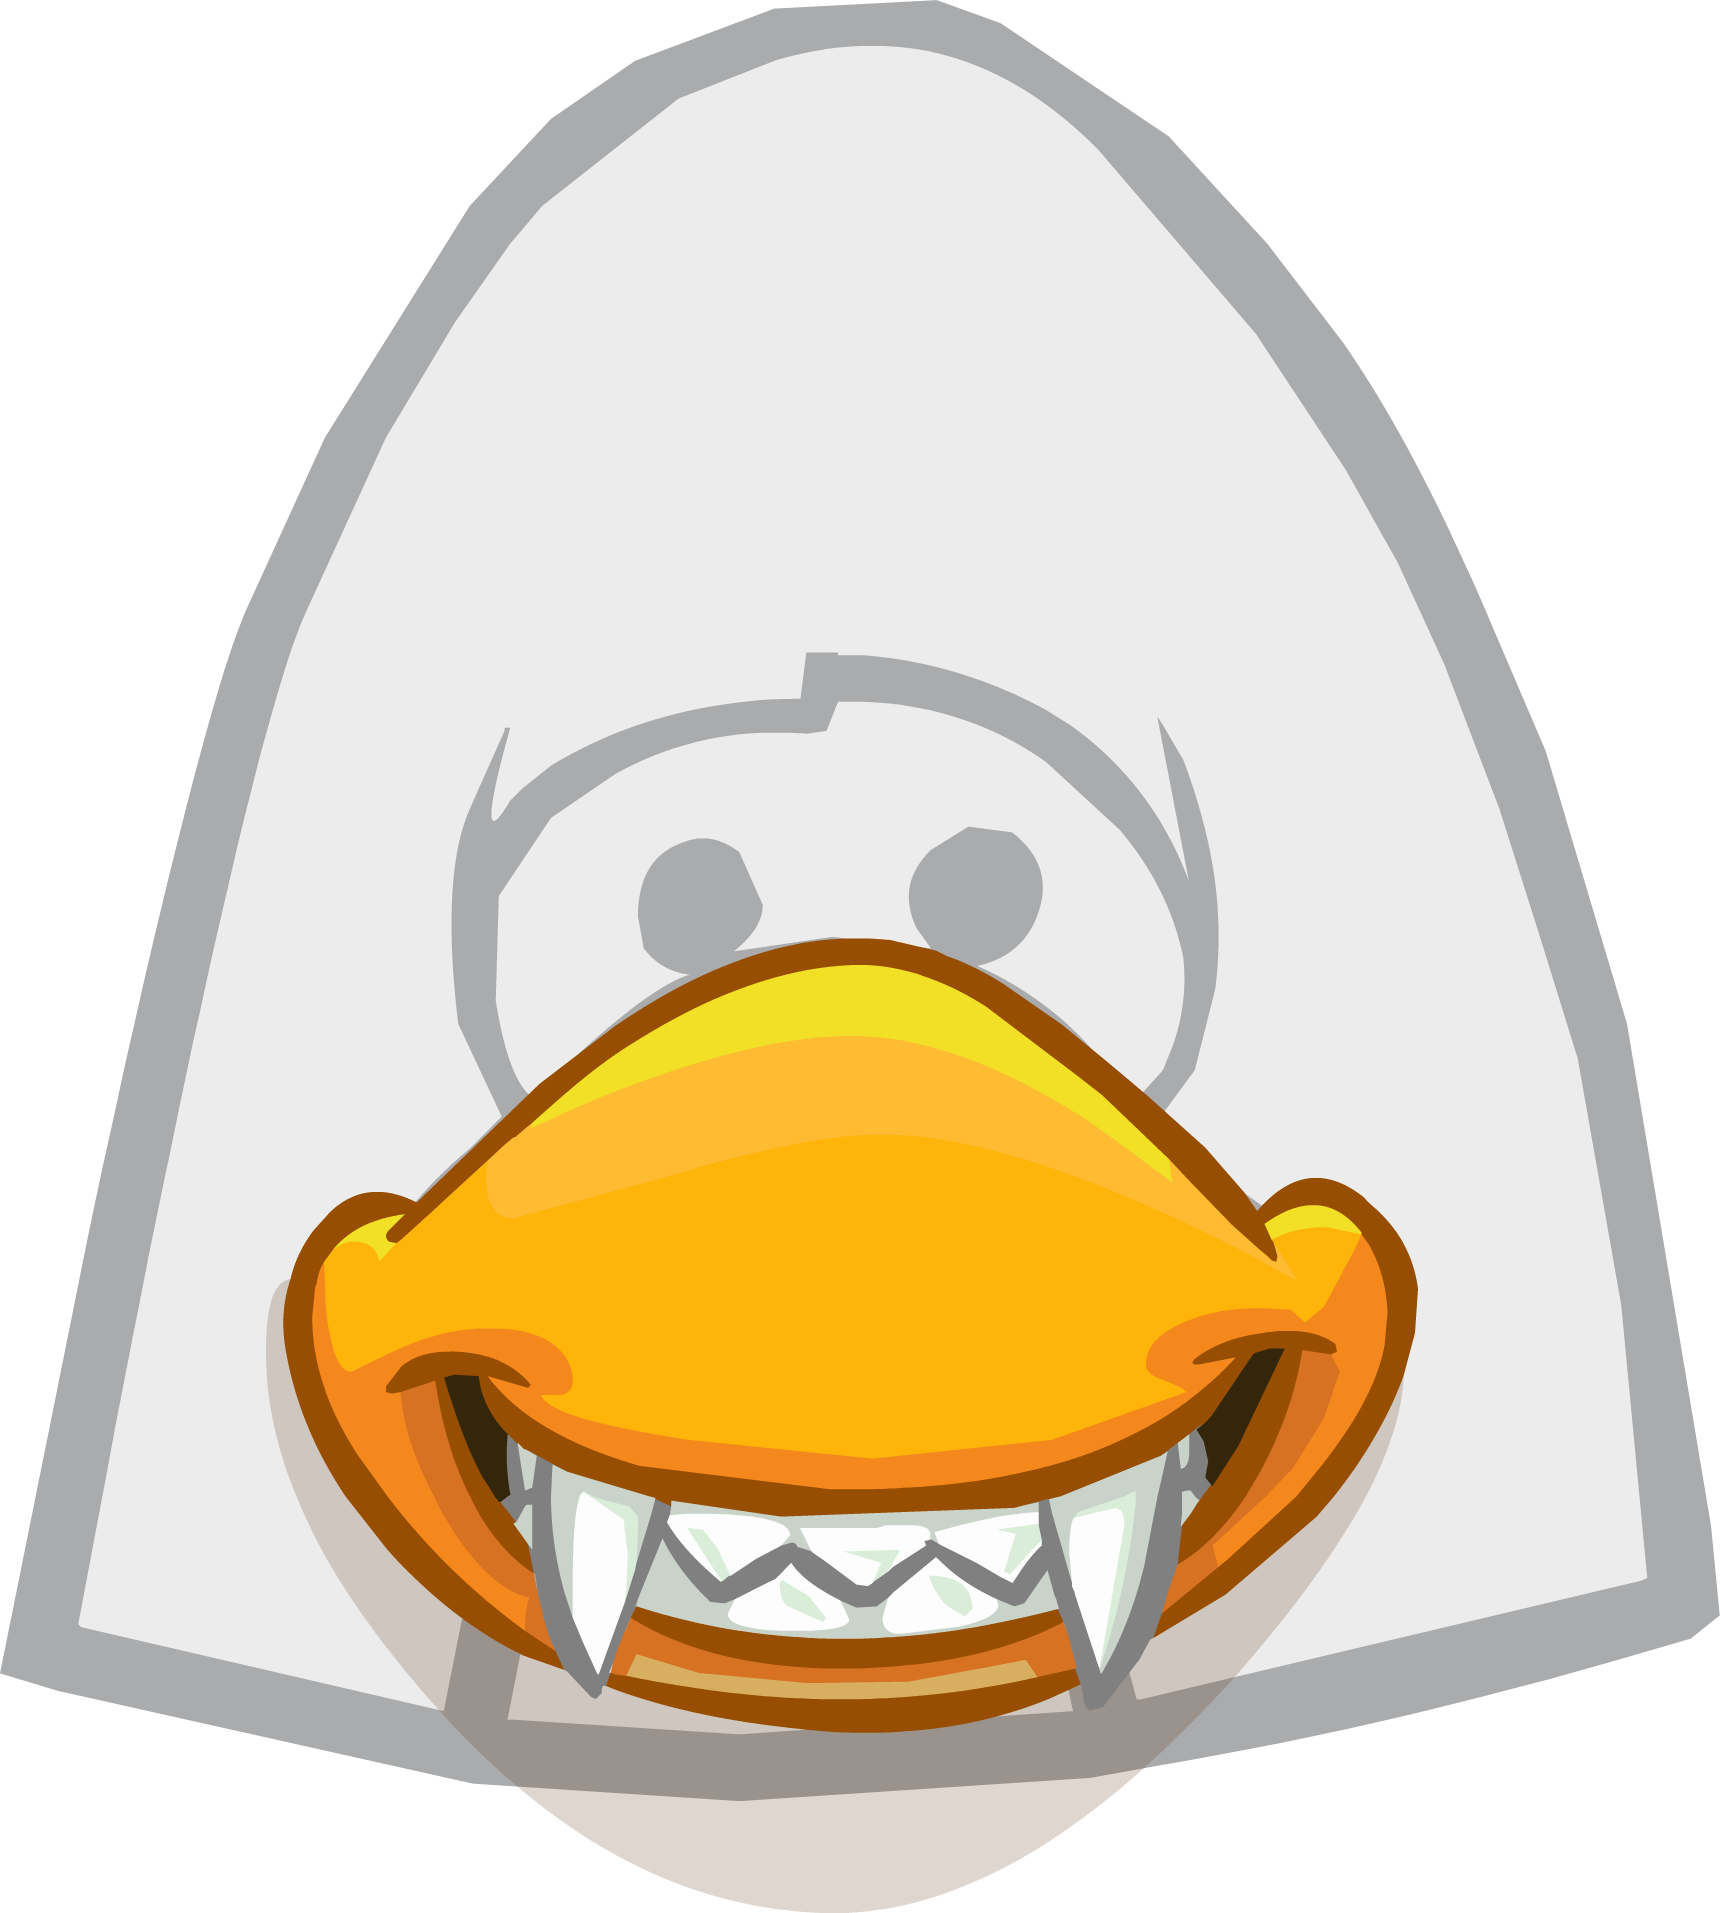 Free vector graphic: Grin, Sm